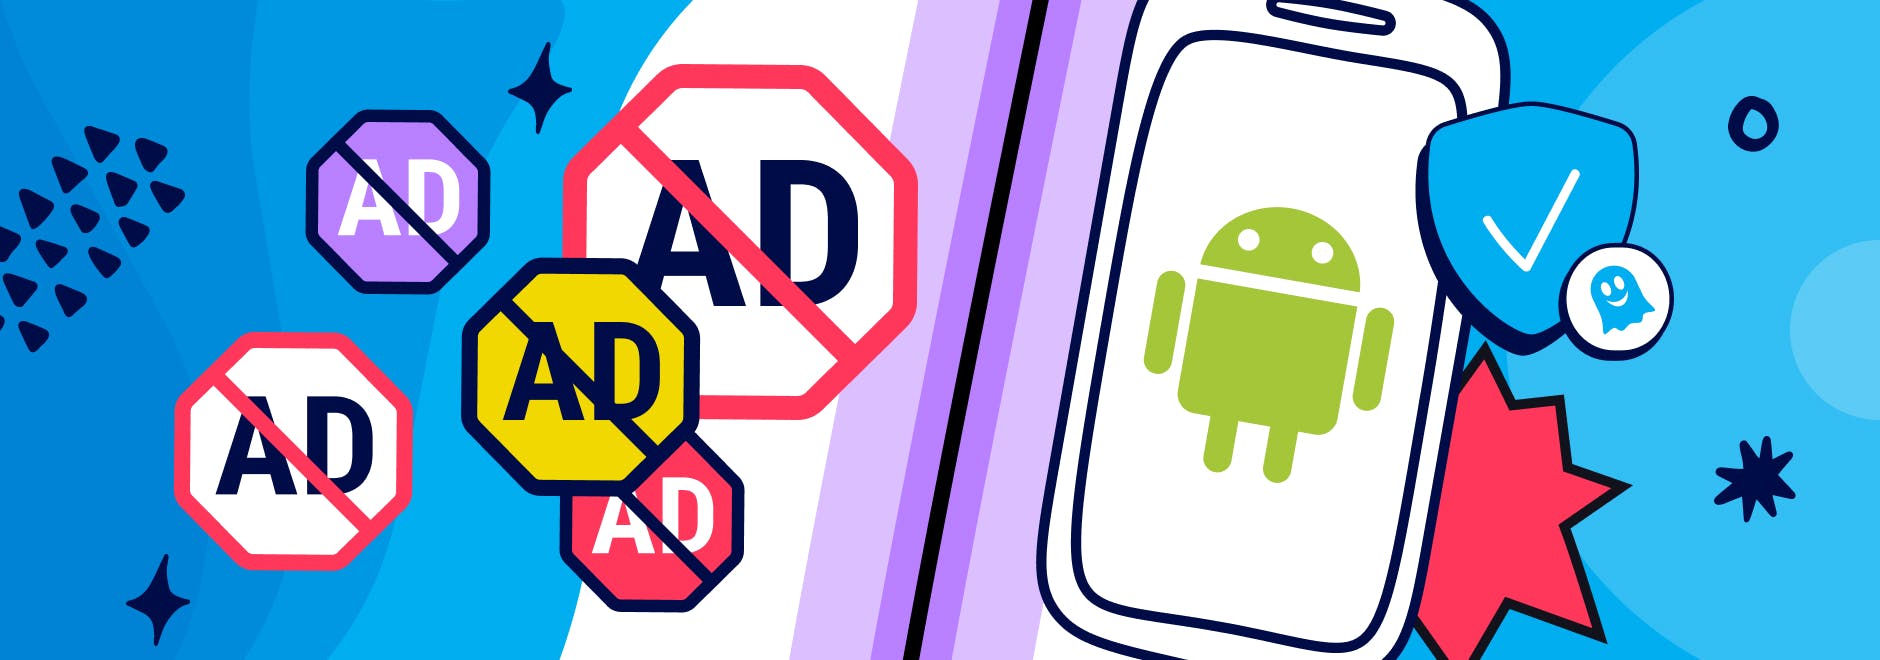 cylinder Zeal Signal How To Block Ads on Android | Ghostery